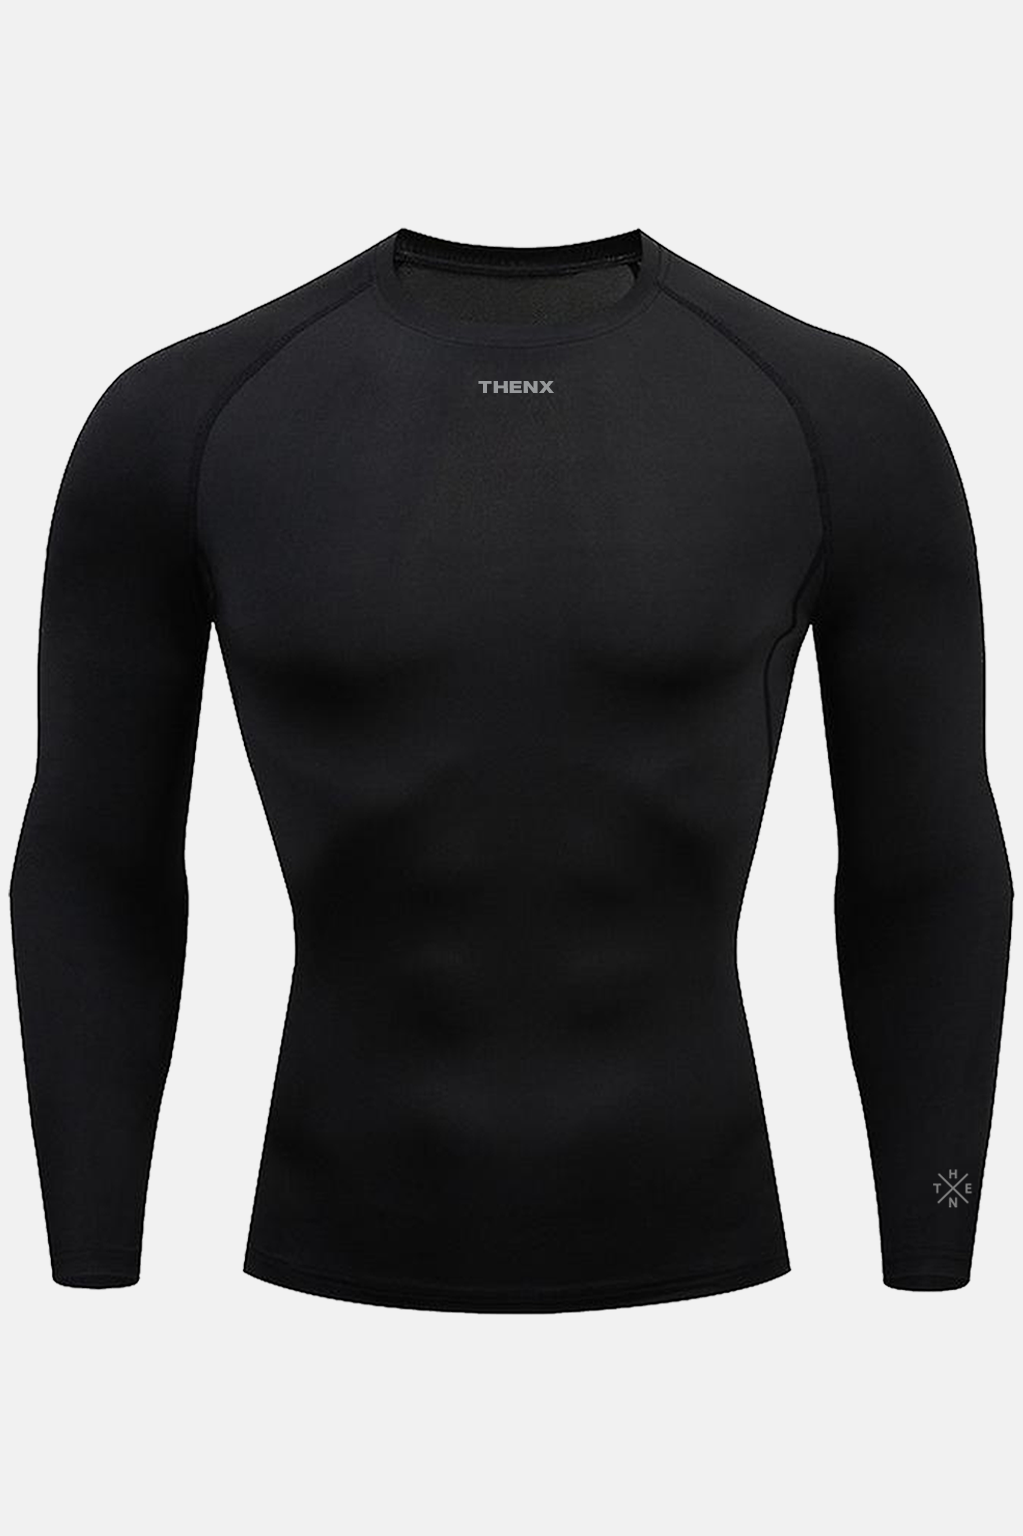 Thenx Long Sleeve Compression Tee - Black - THENX